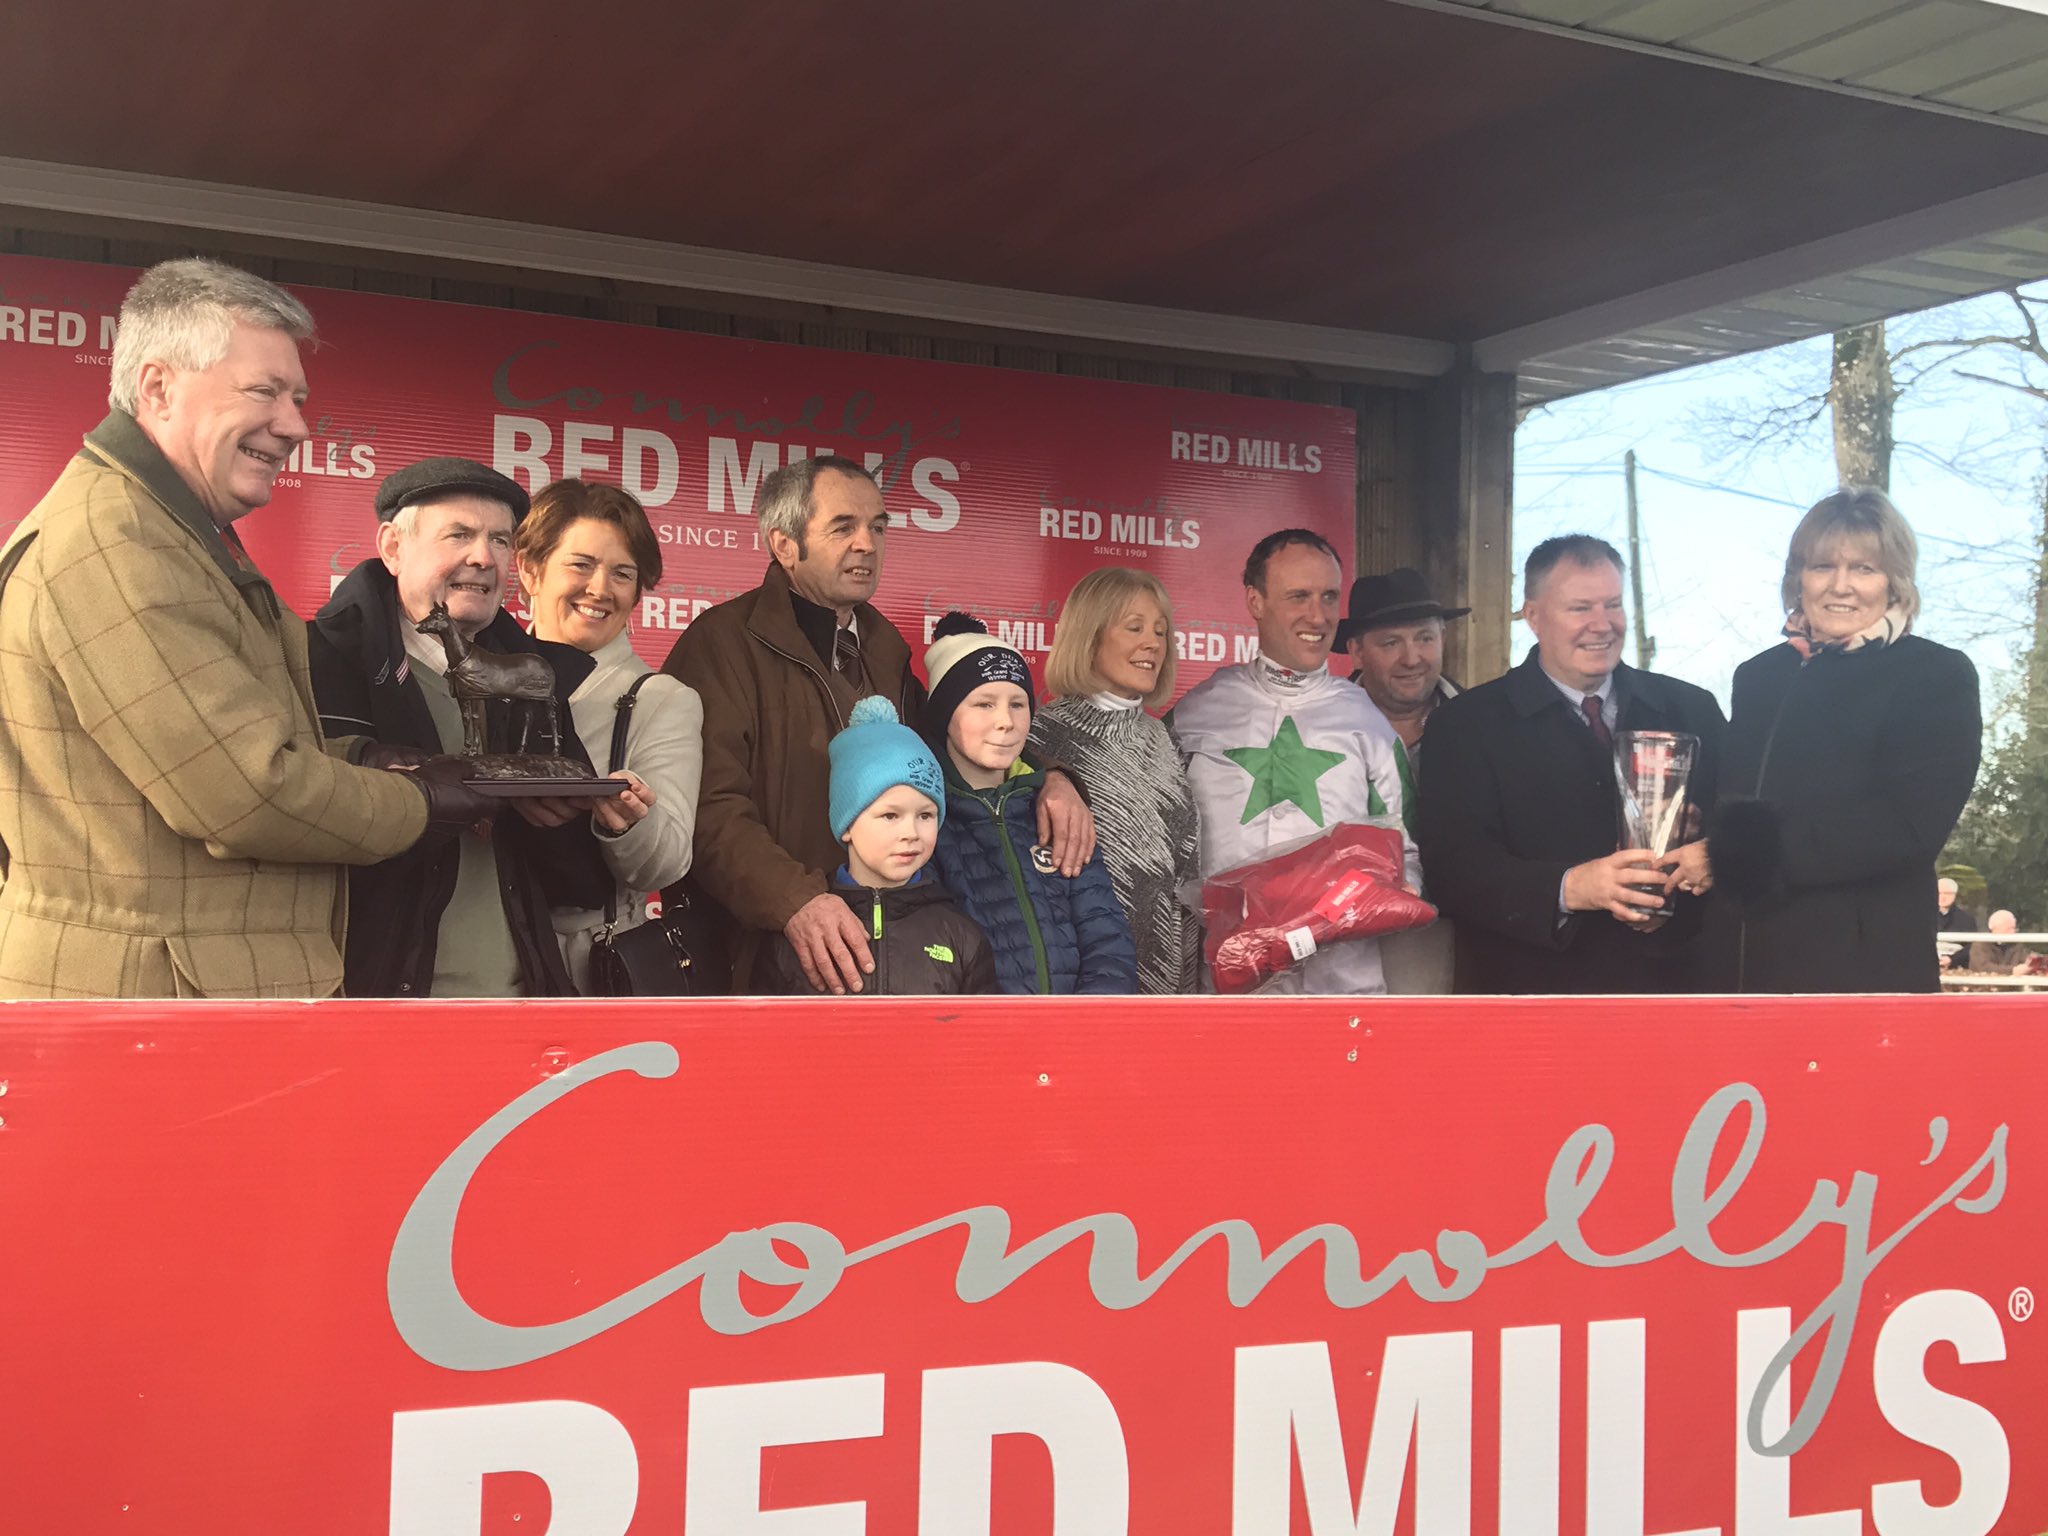 Connolly's RED MILLS on Twitter: "Presentation the #REDMILLSChase winning connections of Our Duke #REDMILLSDayAtGowranPark / Twitter